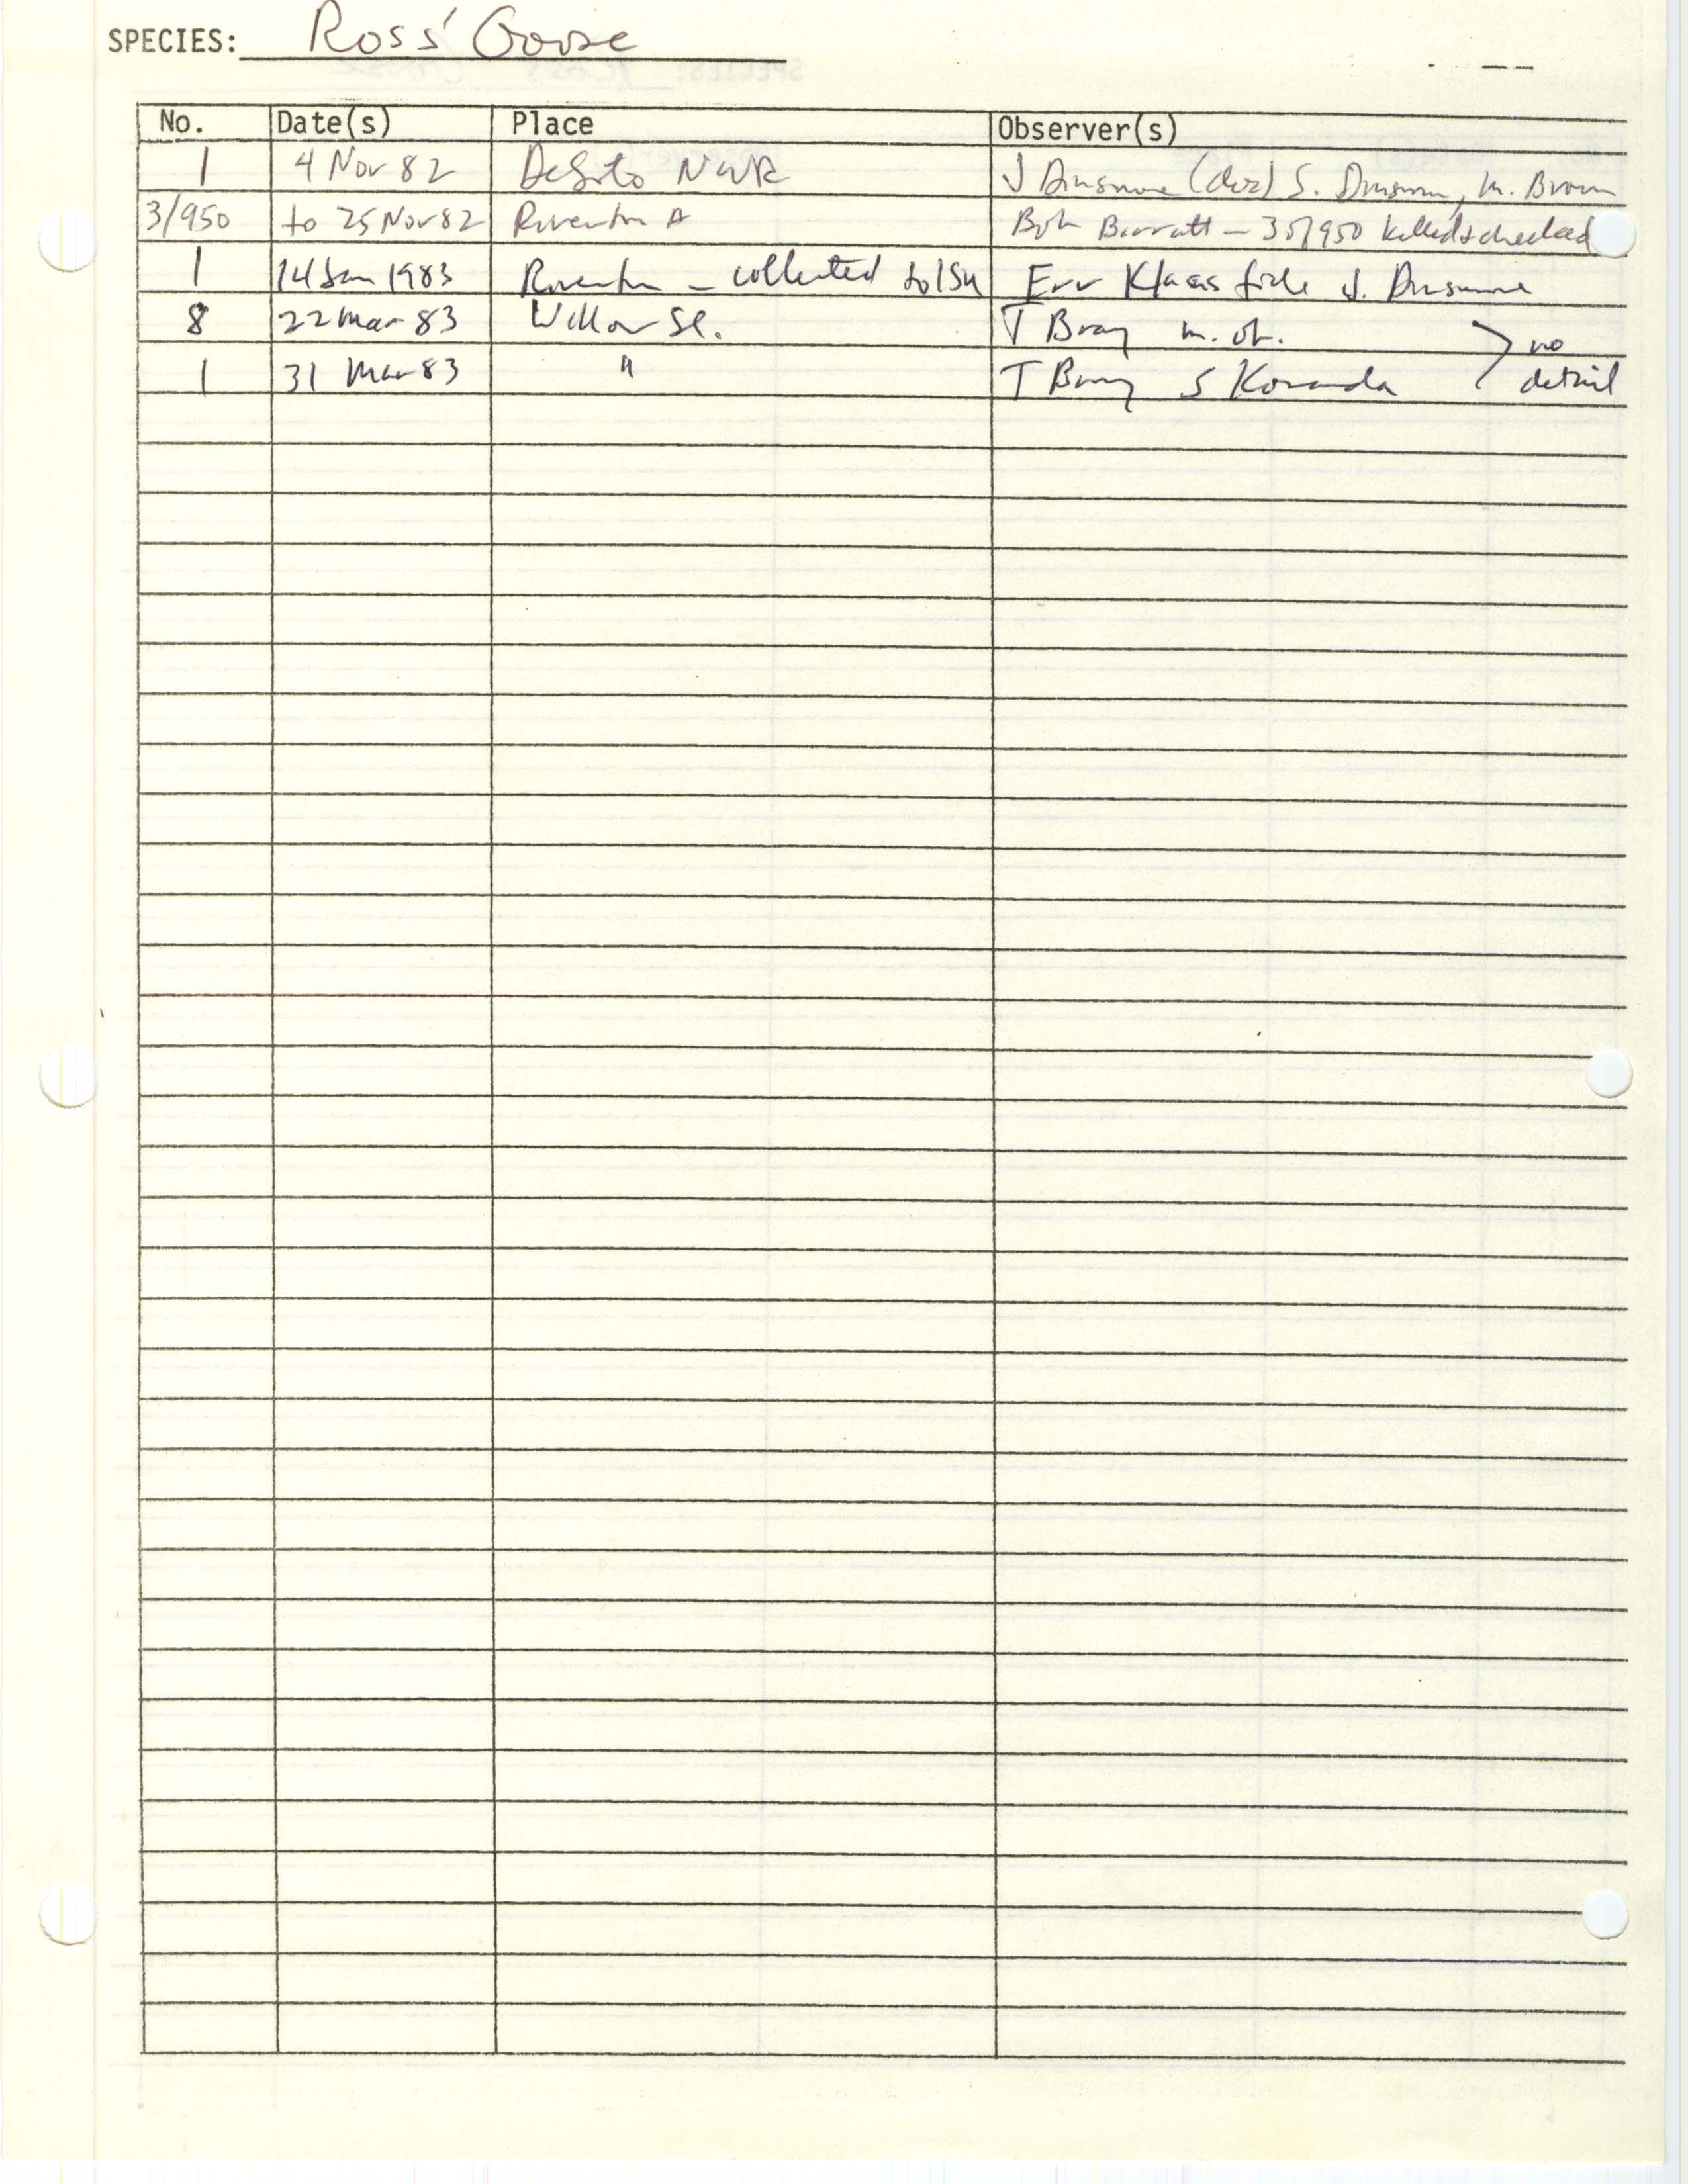 Iowa Ornithologists' Union, field report compiled data, Ross' Goose, 1982-1983